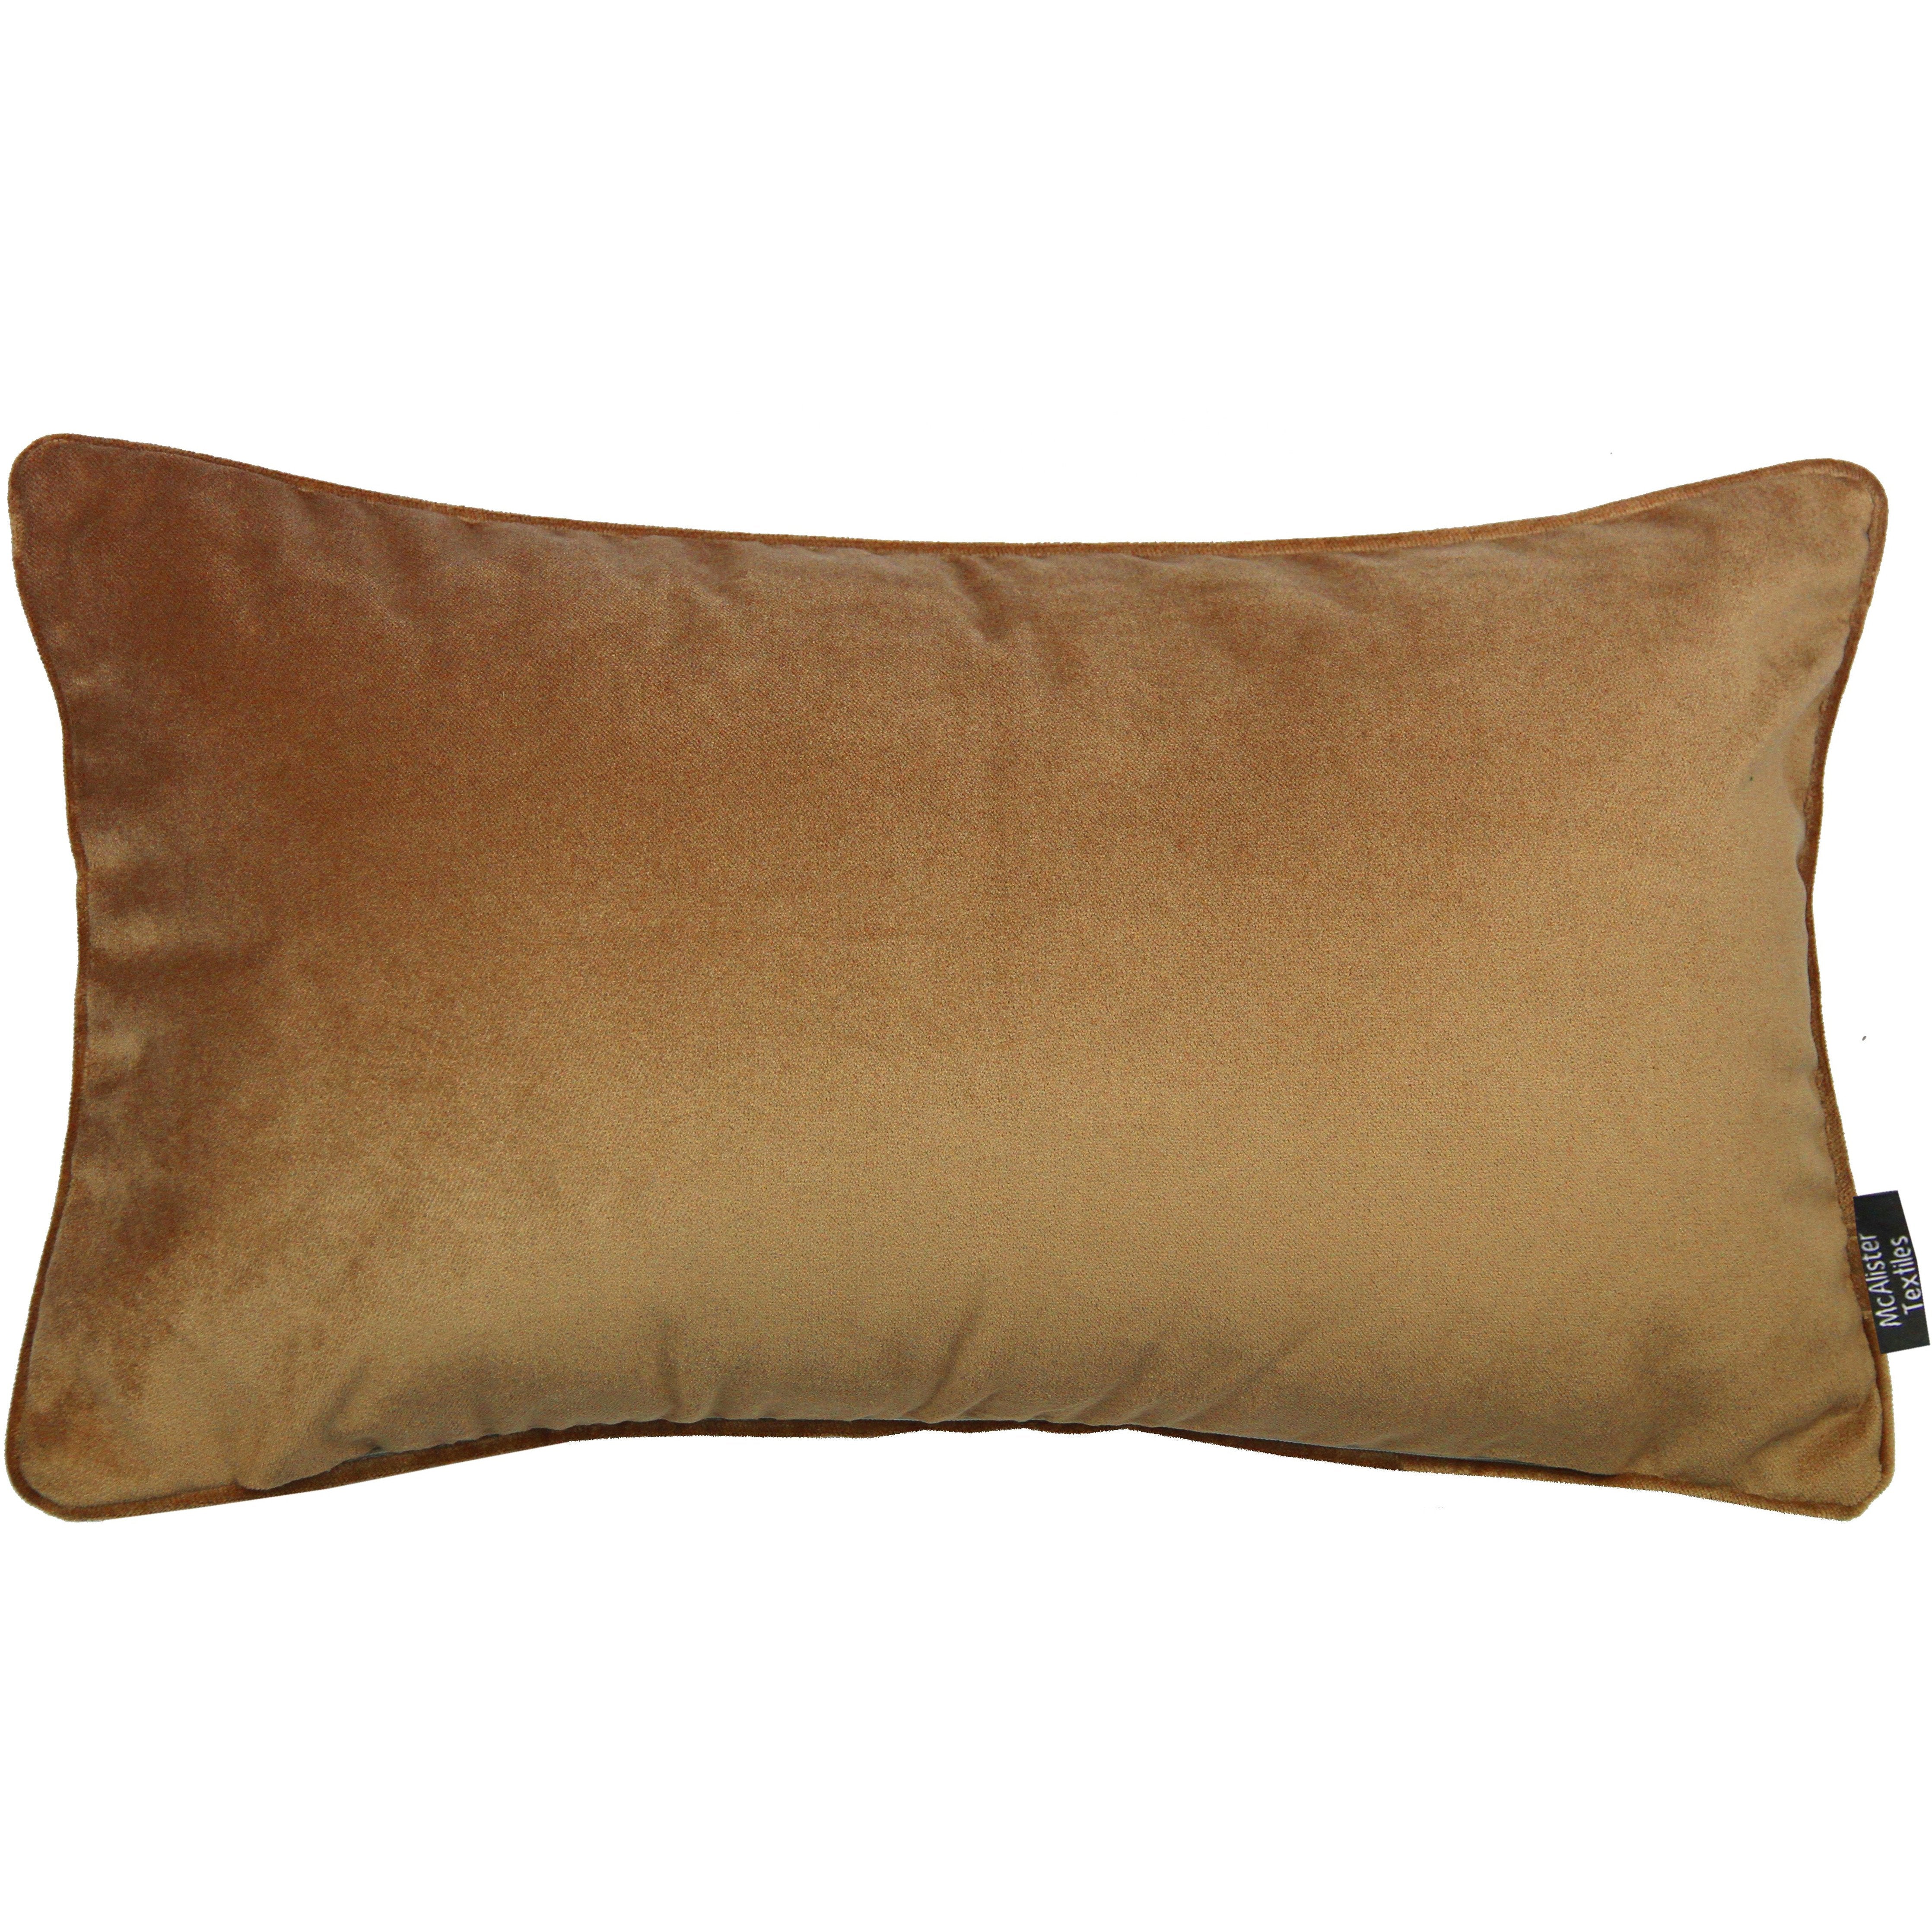 McAlister Textiles Matt Caramel Gold Velvet Cushion Cushions and Covers Cover Only 50cm x 30cm 